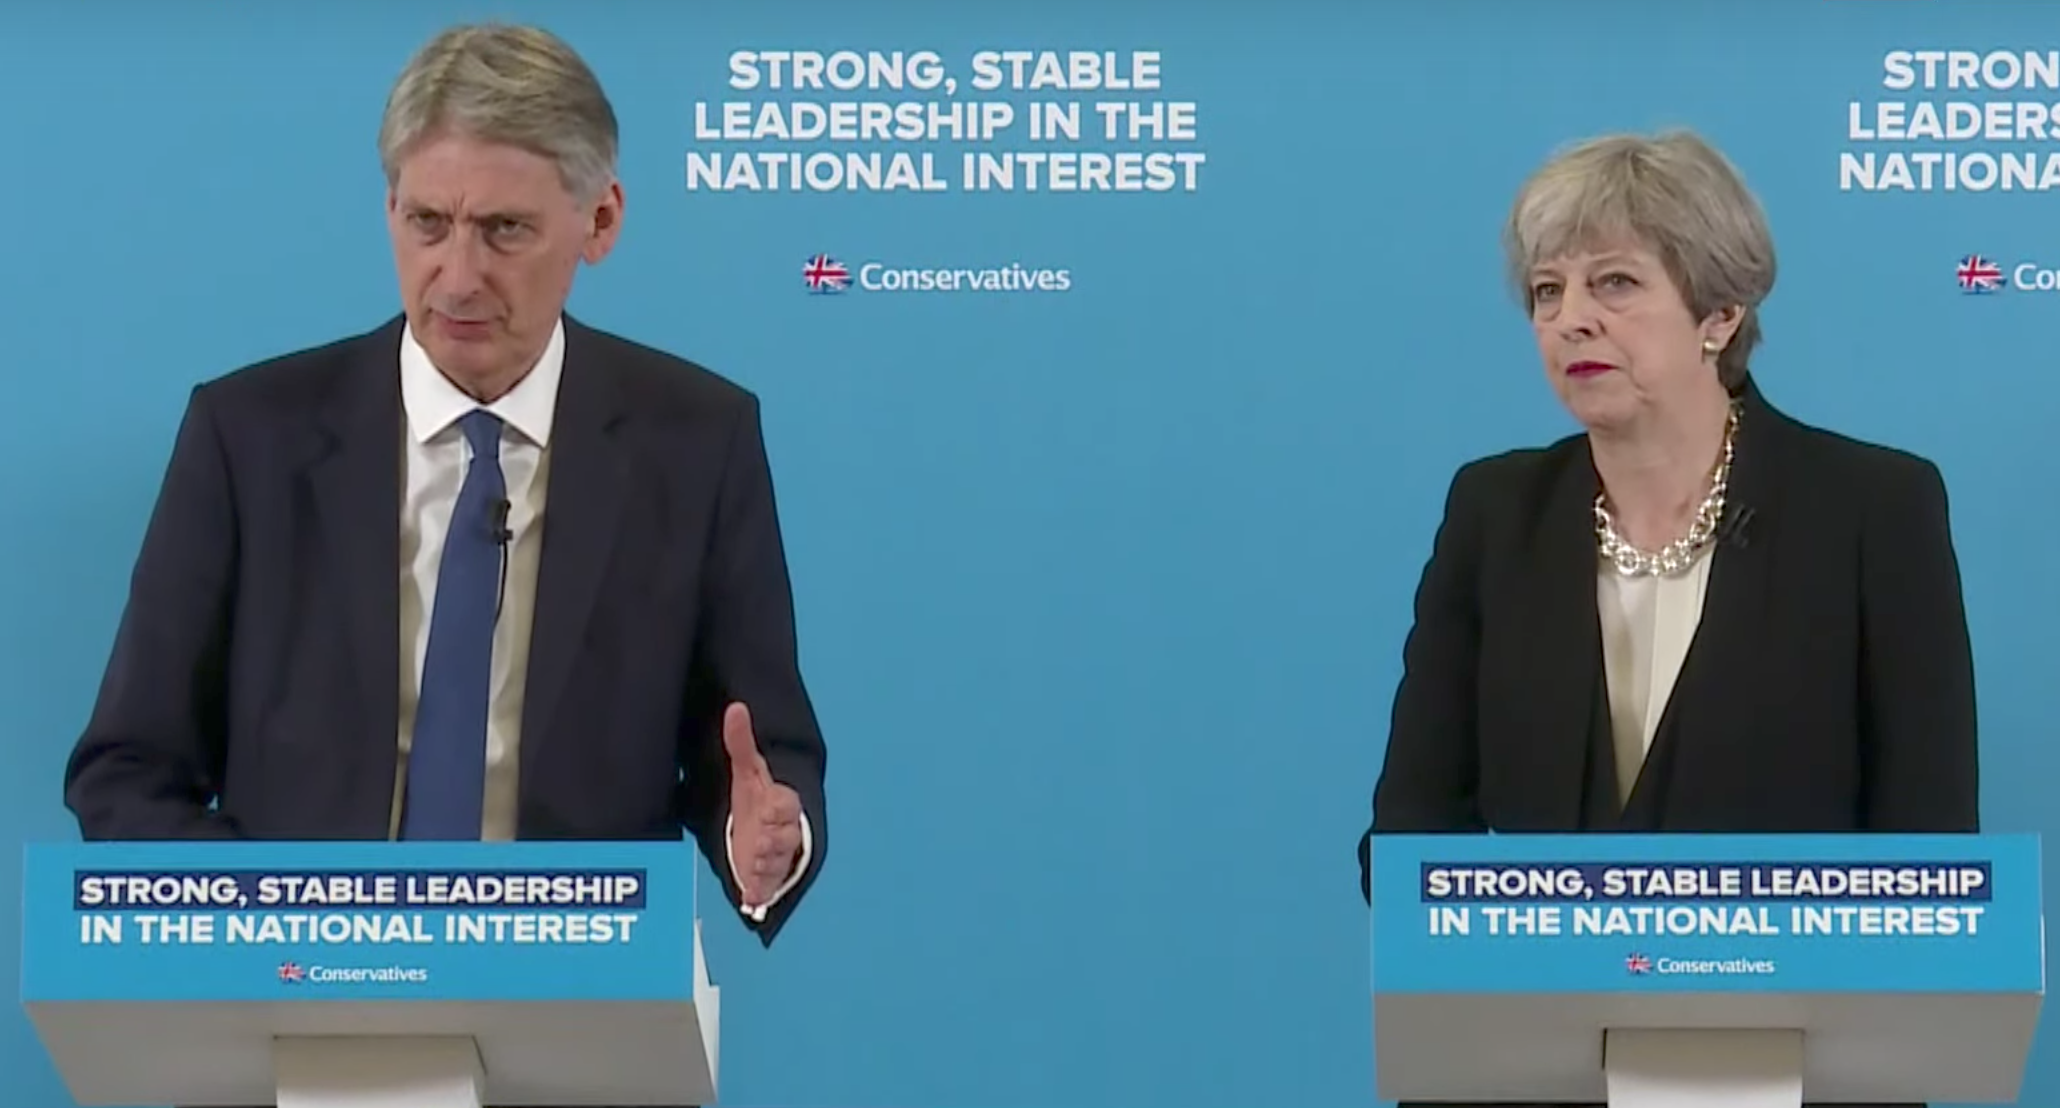 Philip Hammond on the campaign trail with Theresa May ahead of the general election